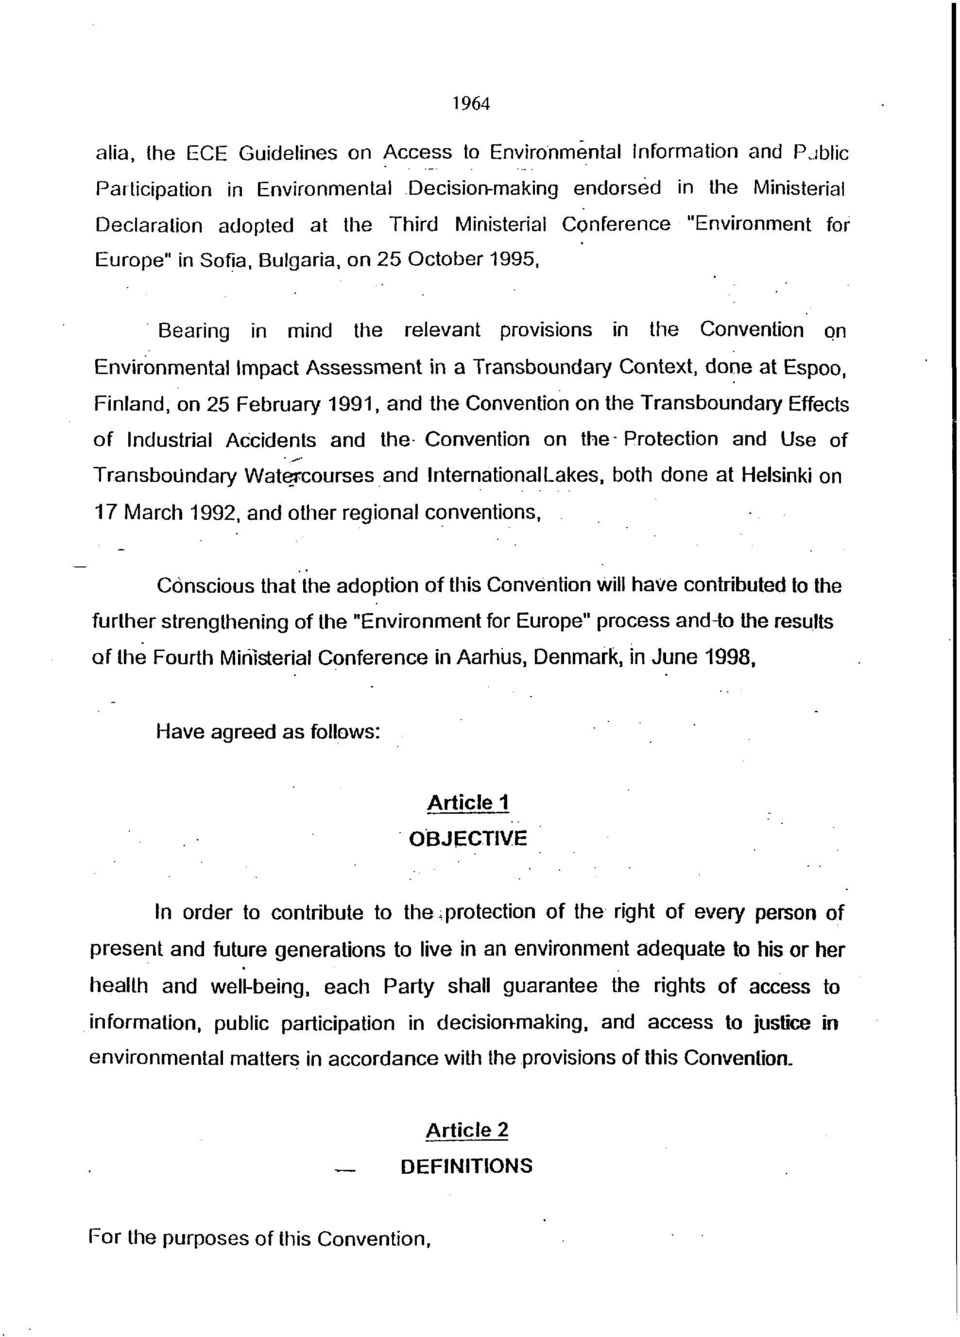 done at Espoo, Finland, on 25 February 1991, and the Convention on the Transboundary Effects of Industrial Accidents and the Convention on the Protection and Use of Transboundary Watercourses and